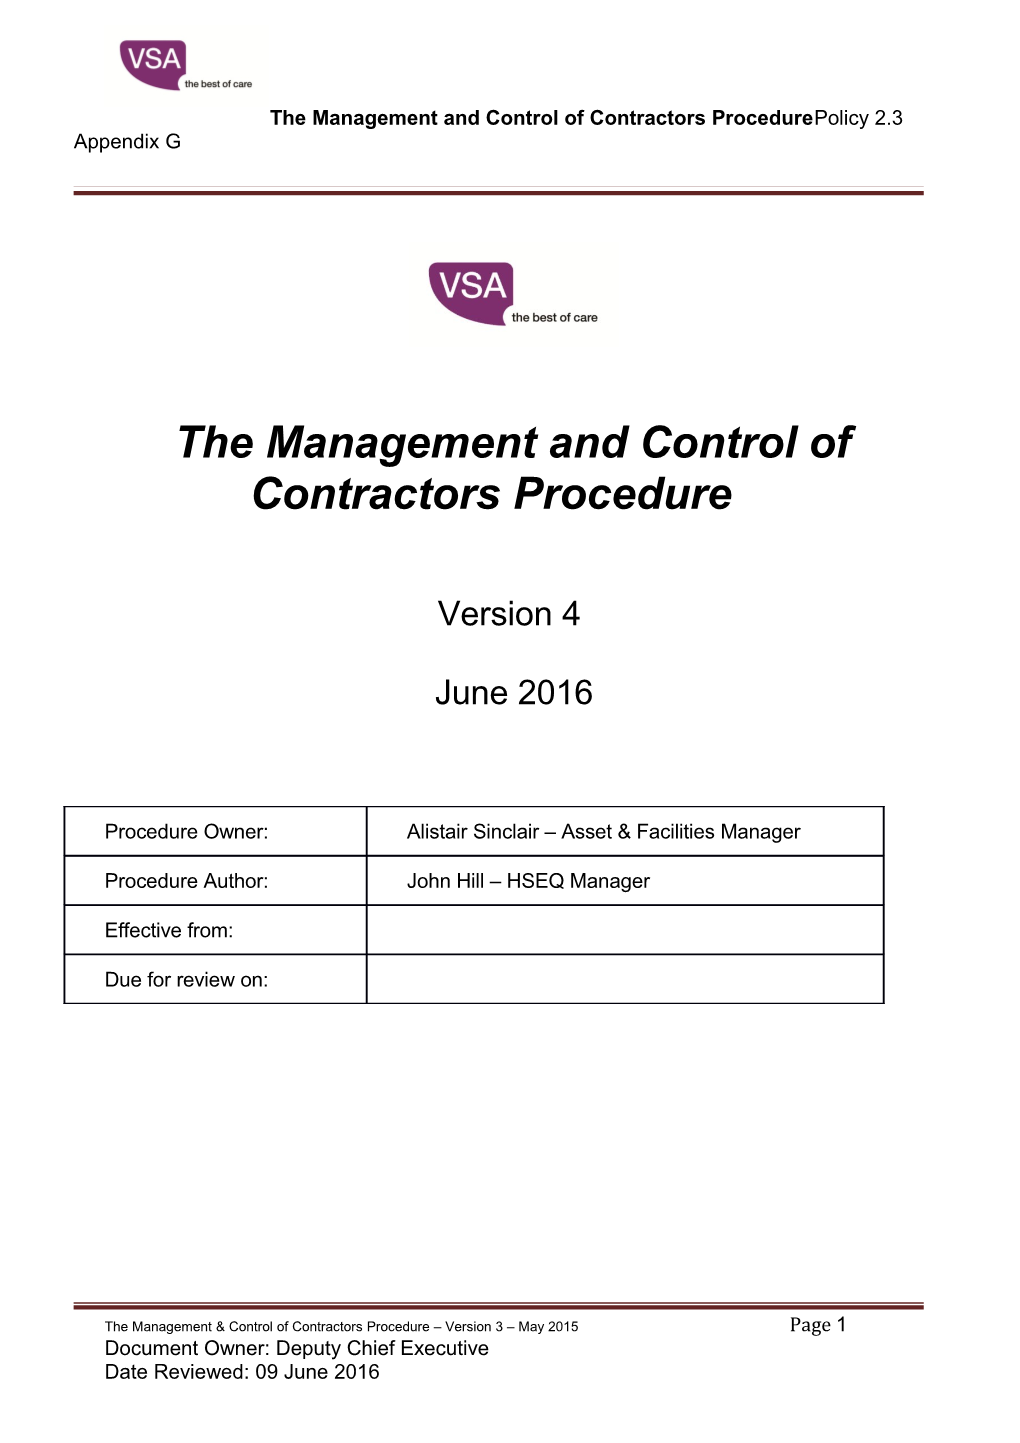 The Management and Control of Contractors Procedure